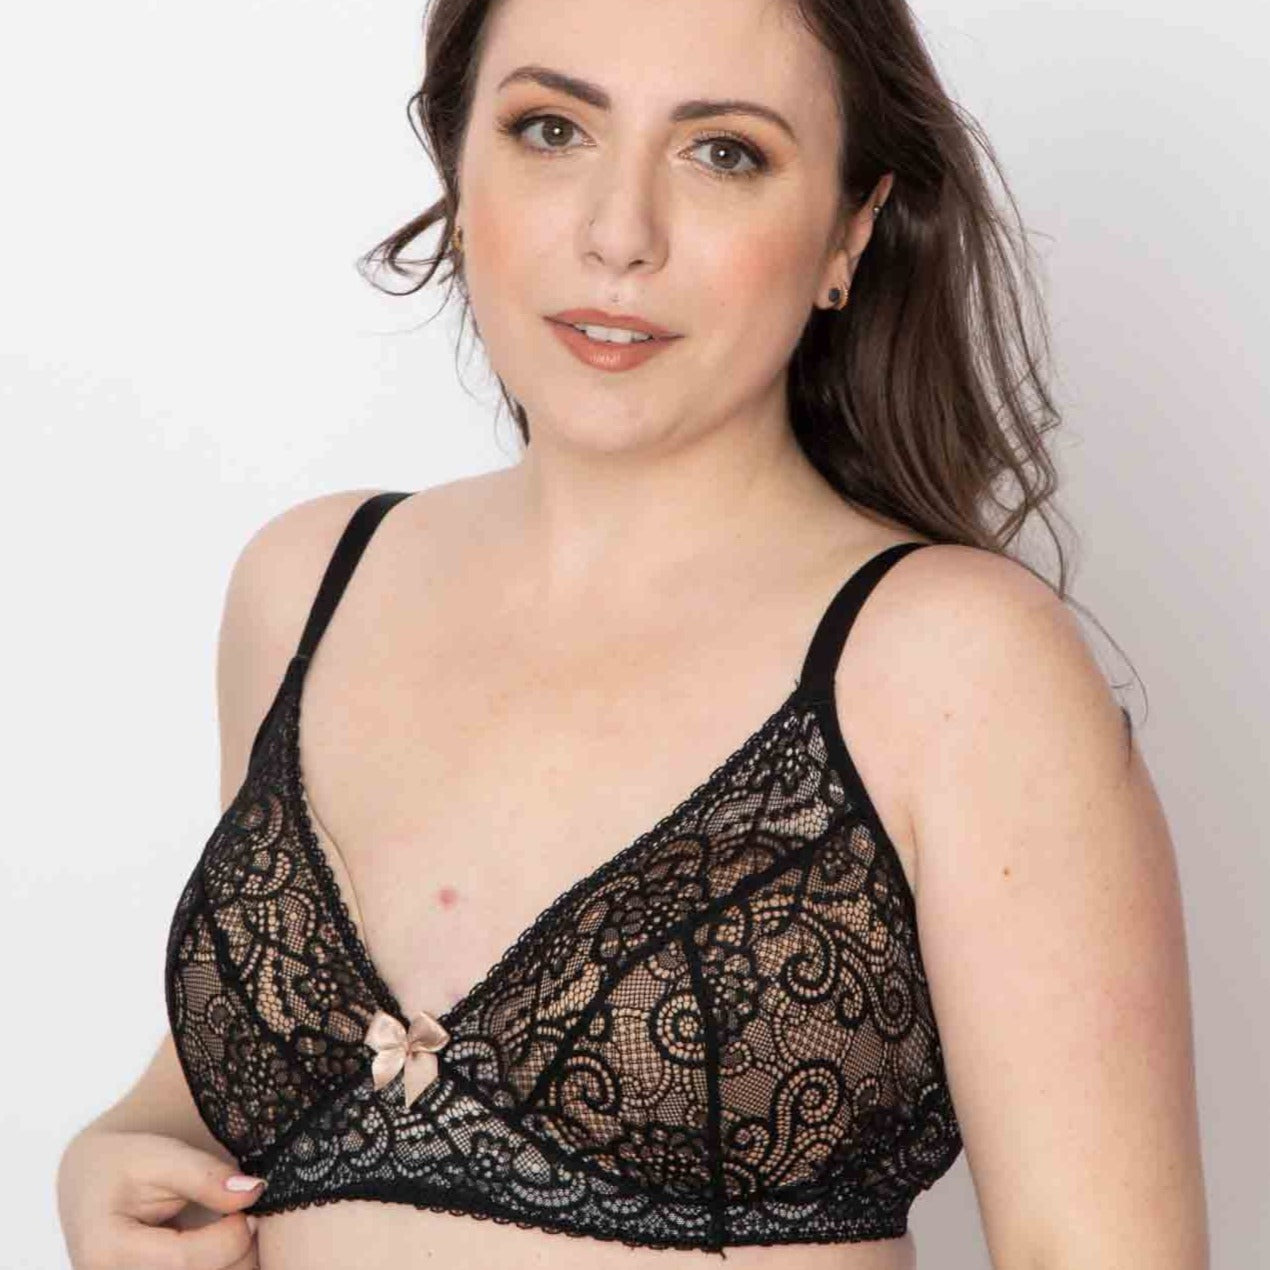 DSIRED Removable-inserts Mastectomy Bra in Black